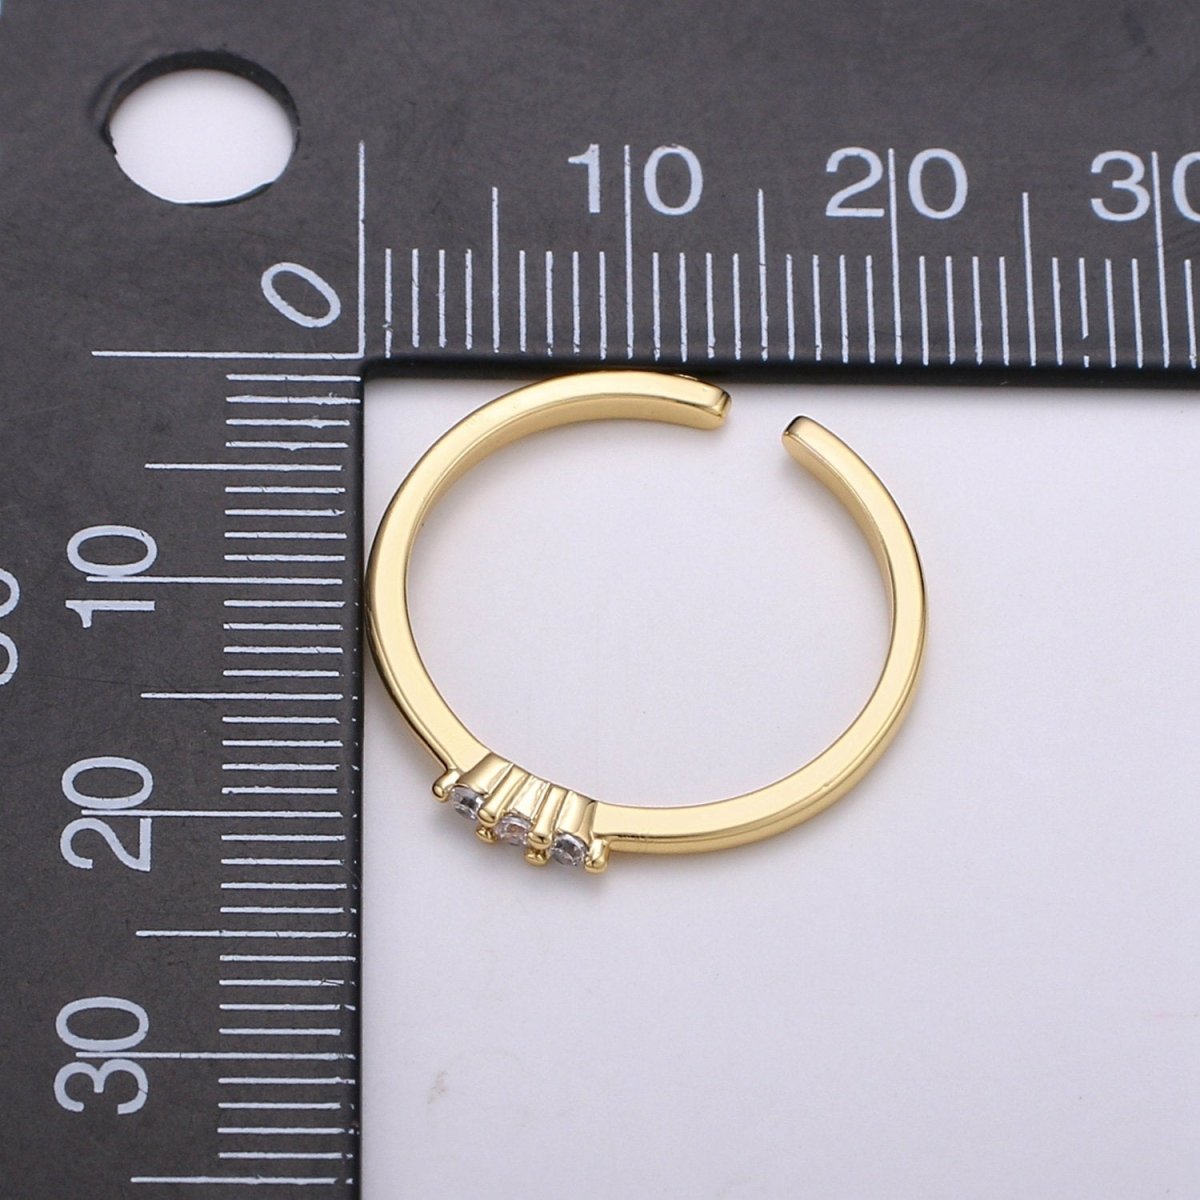 Wedding Gold Ring, Stackable Ring, Thin Ring, Vermeil Ring, Bride Ring, Stacking Rings, Rings, Open Ring, Thin Adjustable Ring, Pinky Ring R-105 - DLUXCA